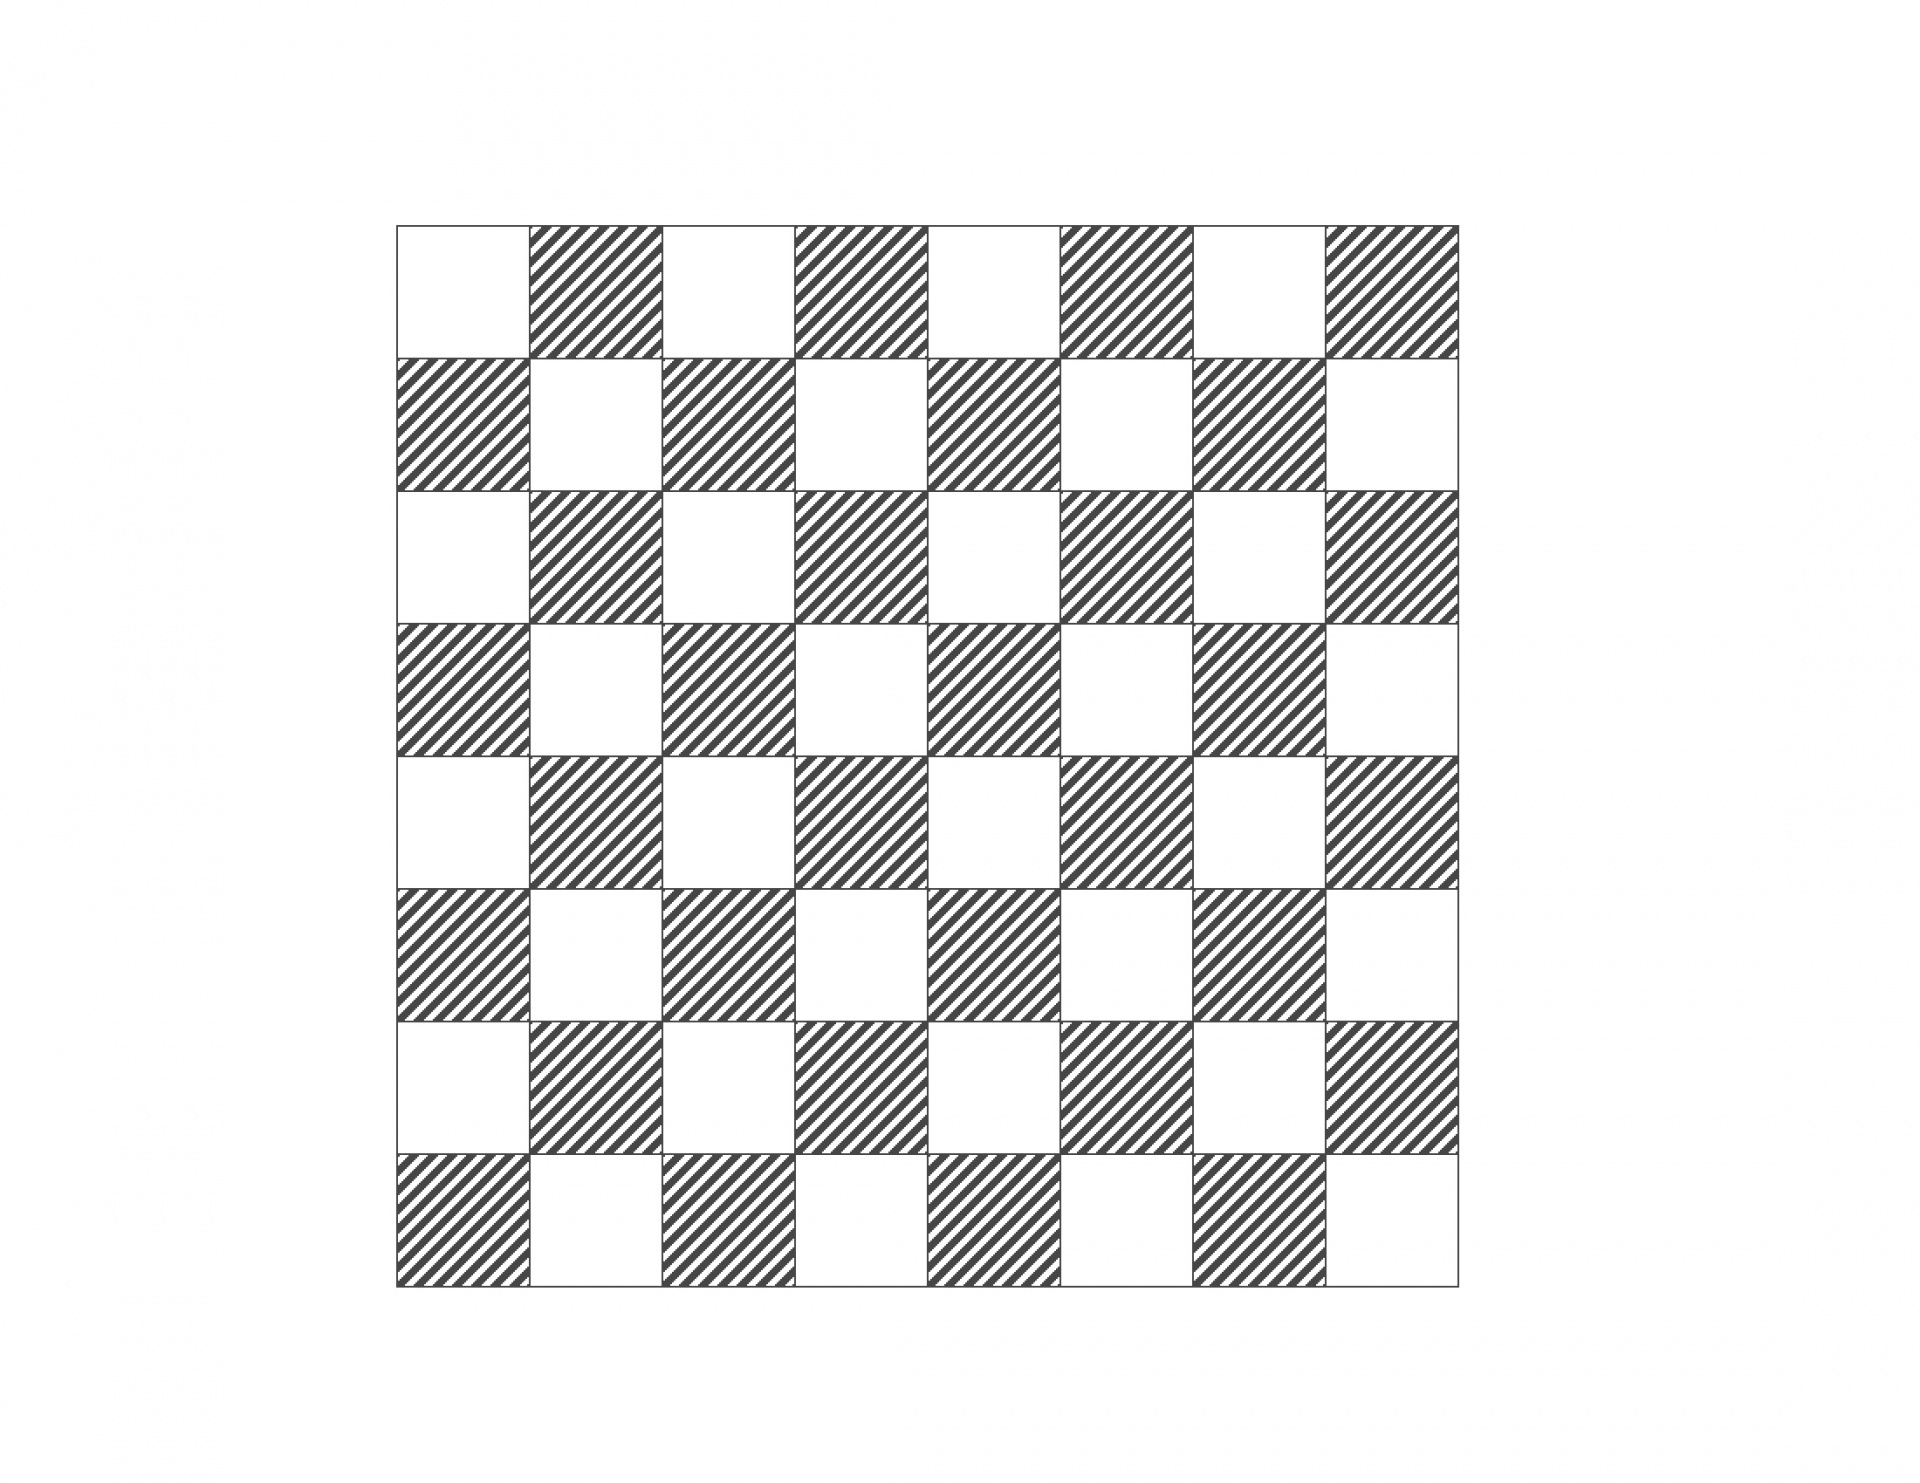 Chess board with diagonal black squares